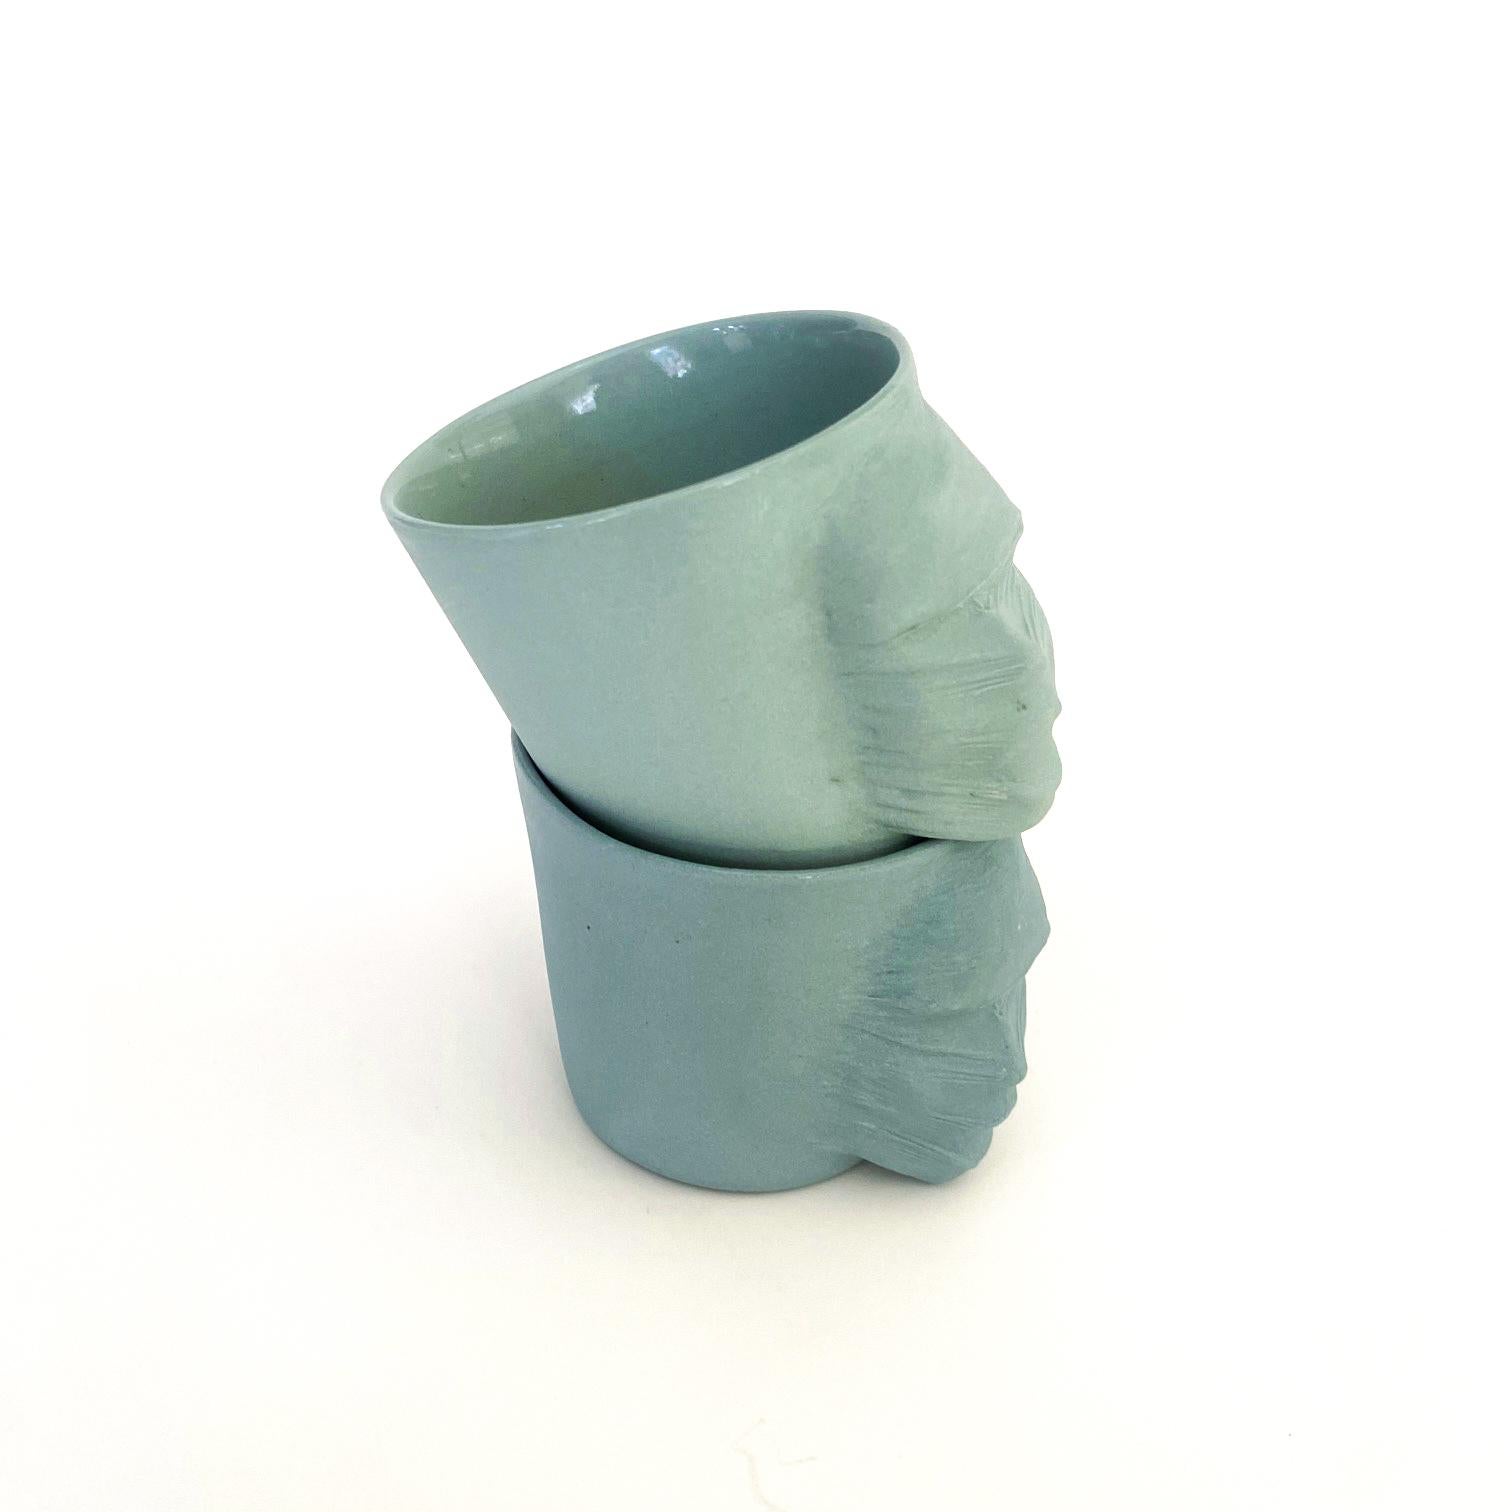 Glazed Sculptural Porcelain Cups Set of 2 by Hulya Sozer, Silhouette, Turquoise Shades For Sale